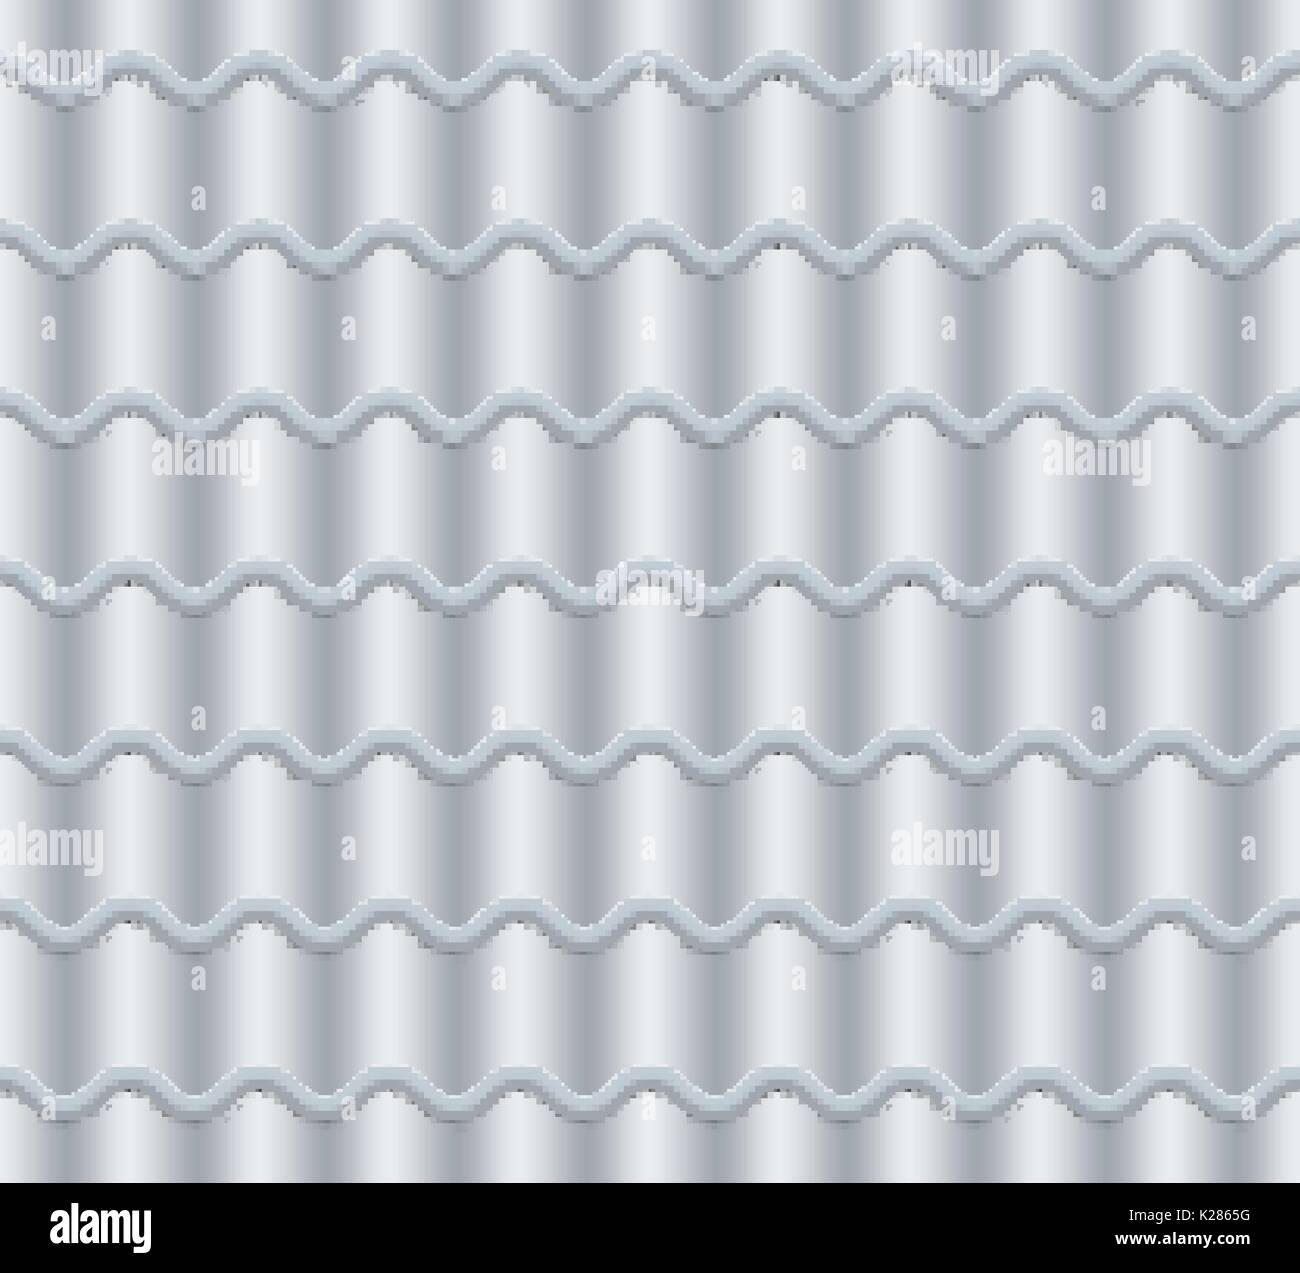 Grey Corrugated Tile Vector. Seamless Pattern. Classic Ceramic Tiles Cover. Fragment Of Roof Illustration. Stock Vector